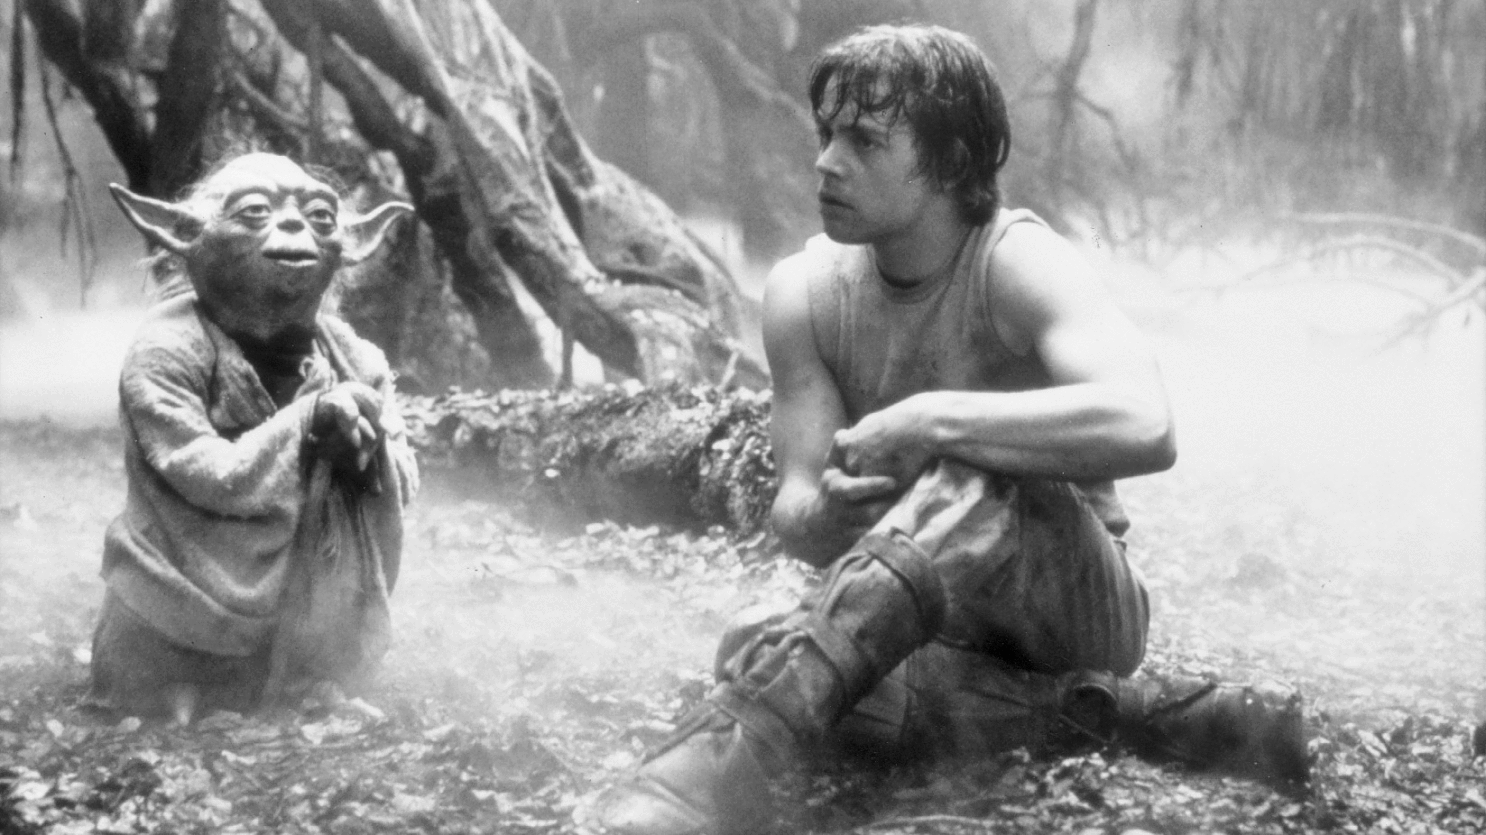 Opinion: 'Star Wars' wisdom for Mother's Day: May the Force be with Mom -  Los Angeles Times